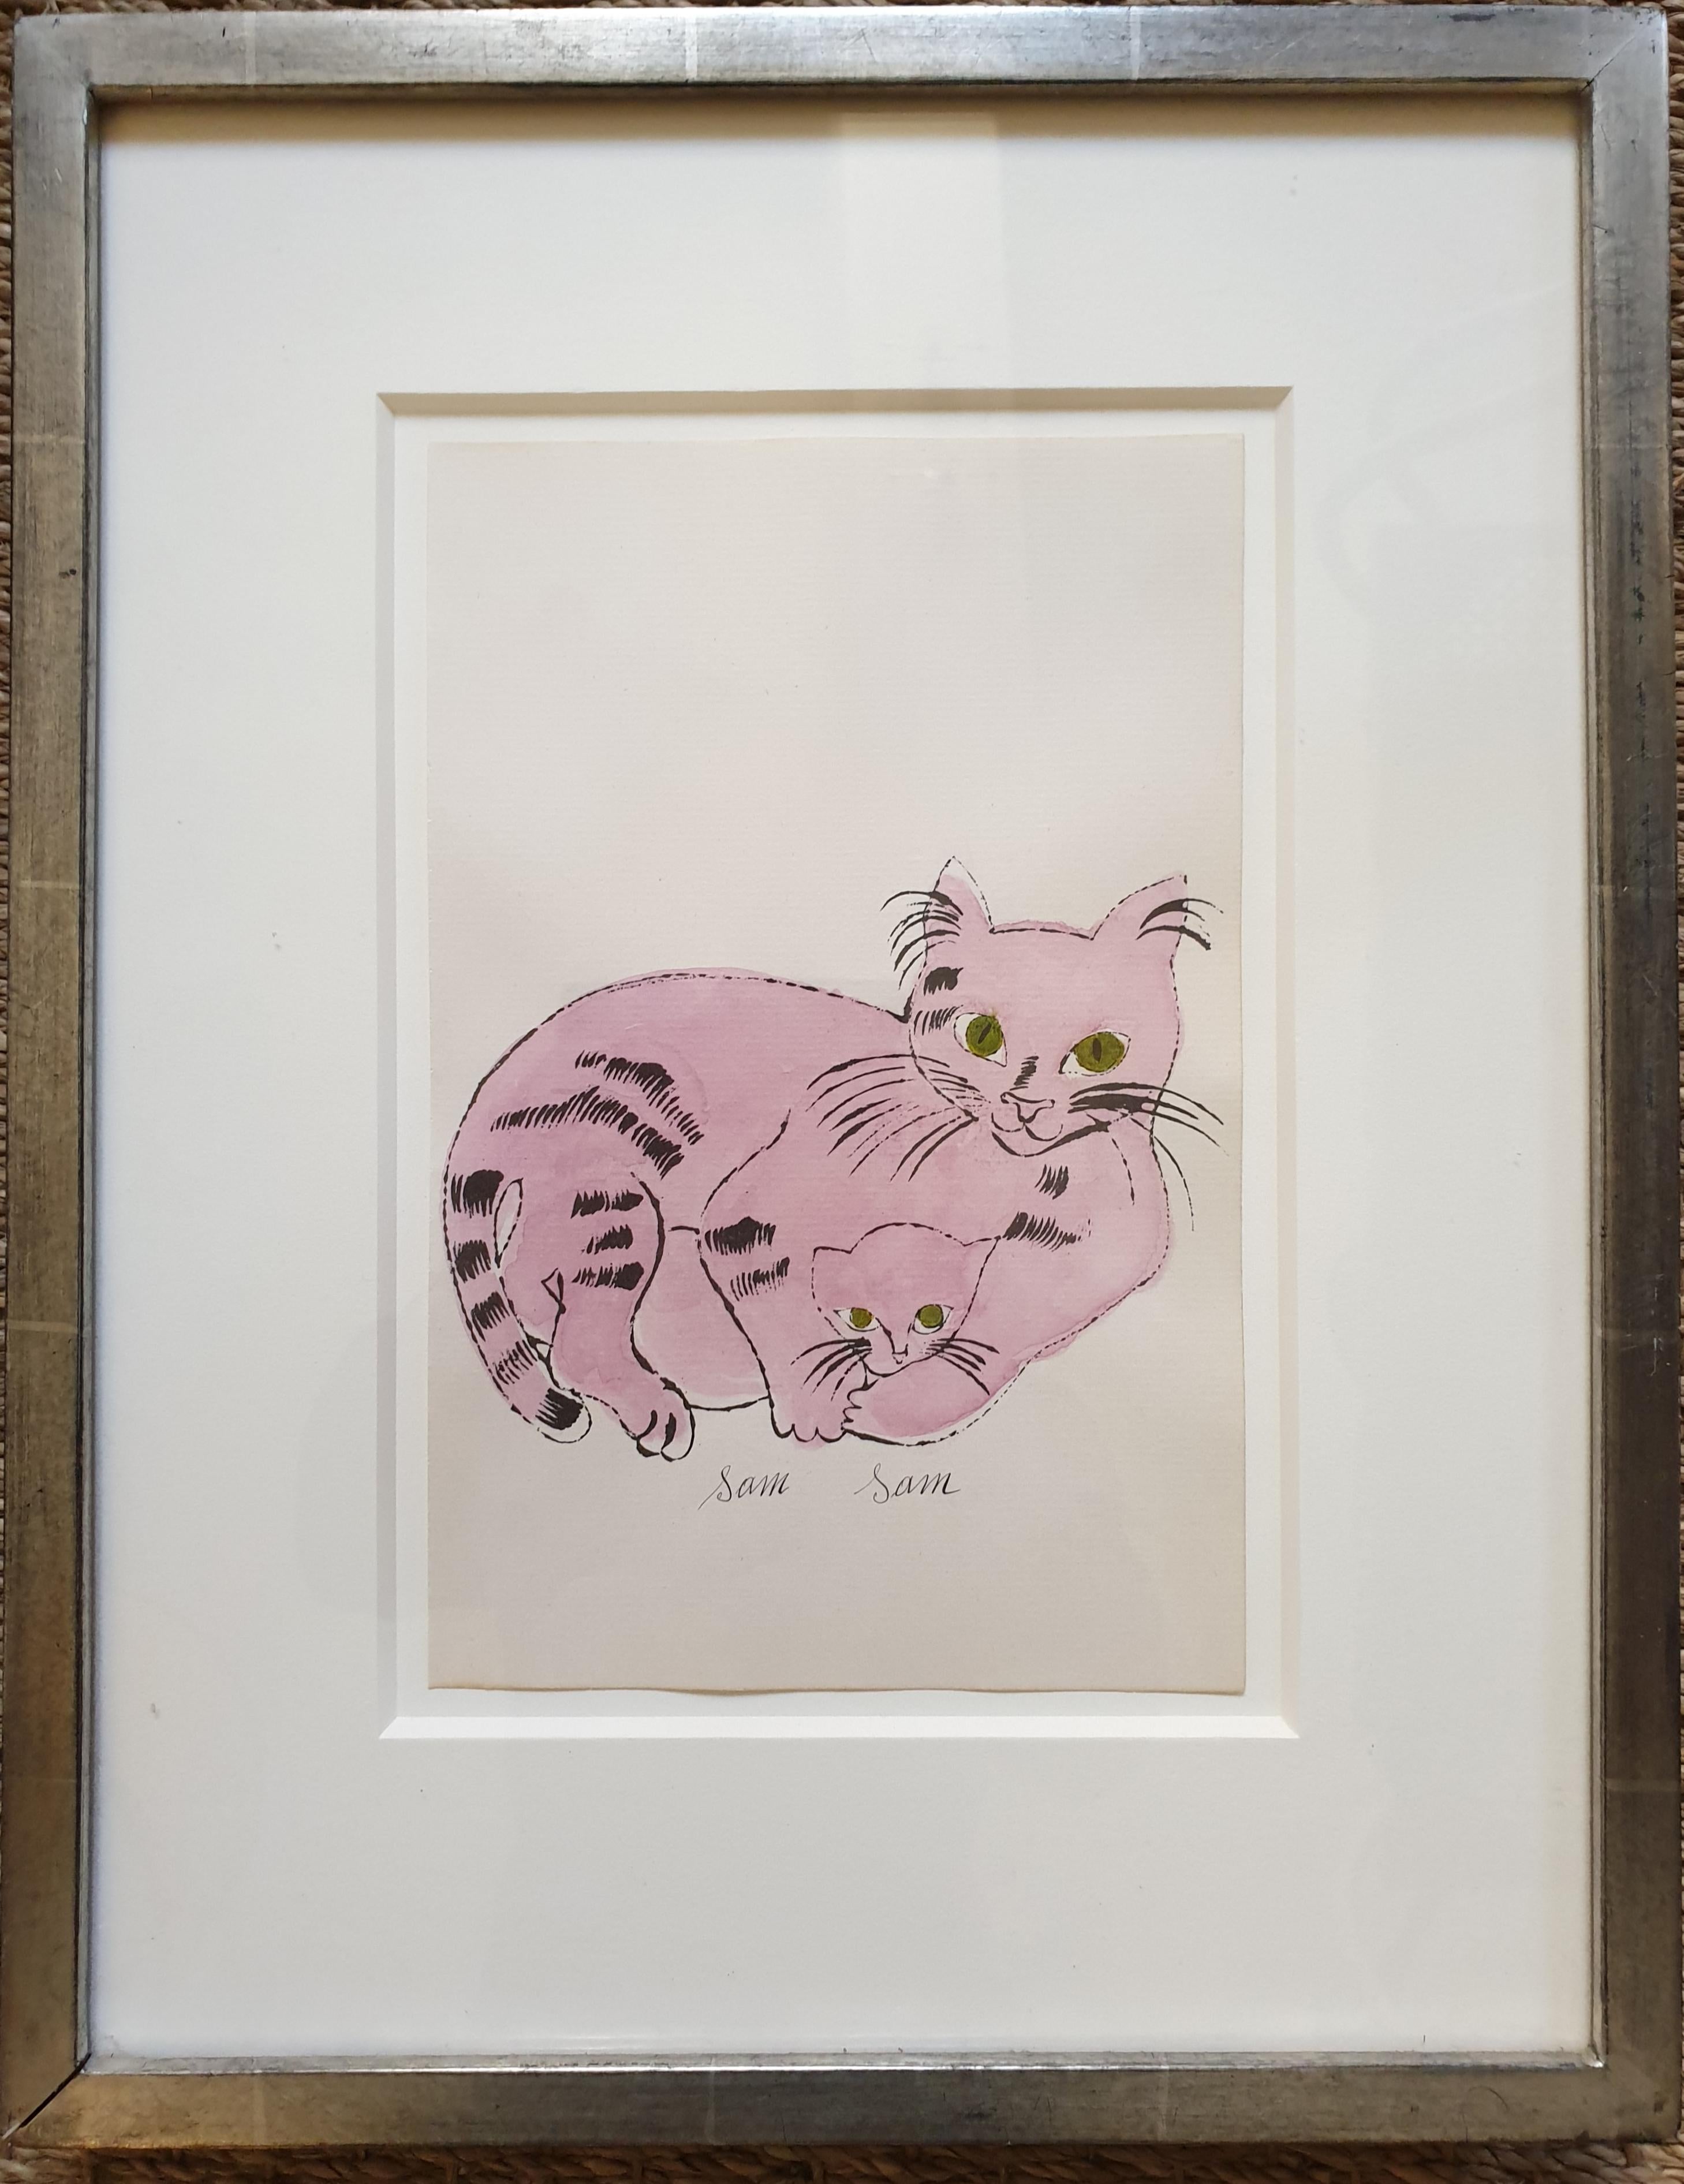 Andy Warhol Animal Art - Pink 'Sam Sam' from 25 Cats... Hand-Coloured lithograph with signed frontispiece